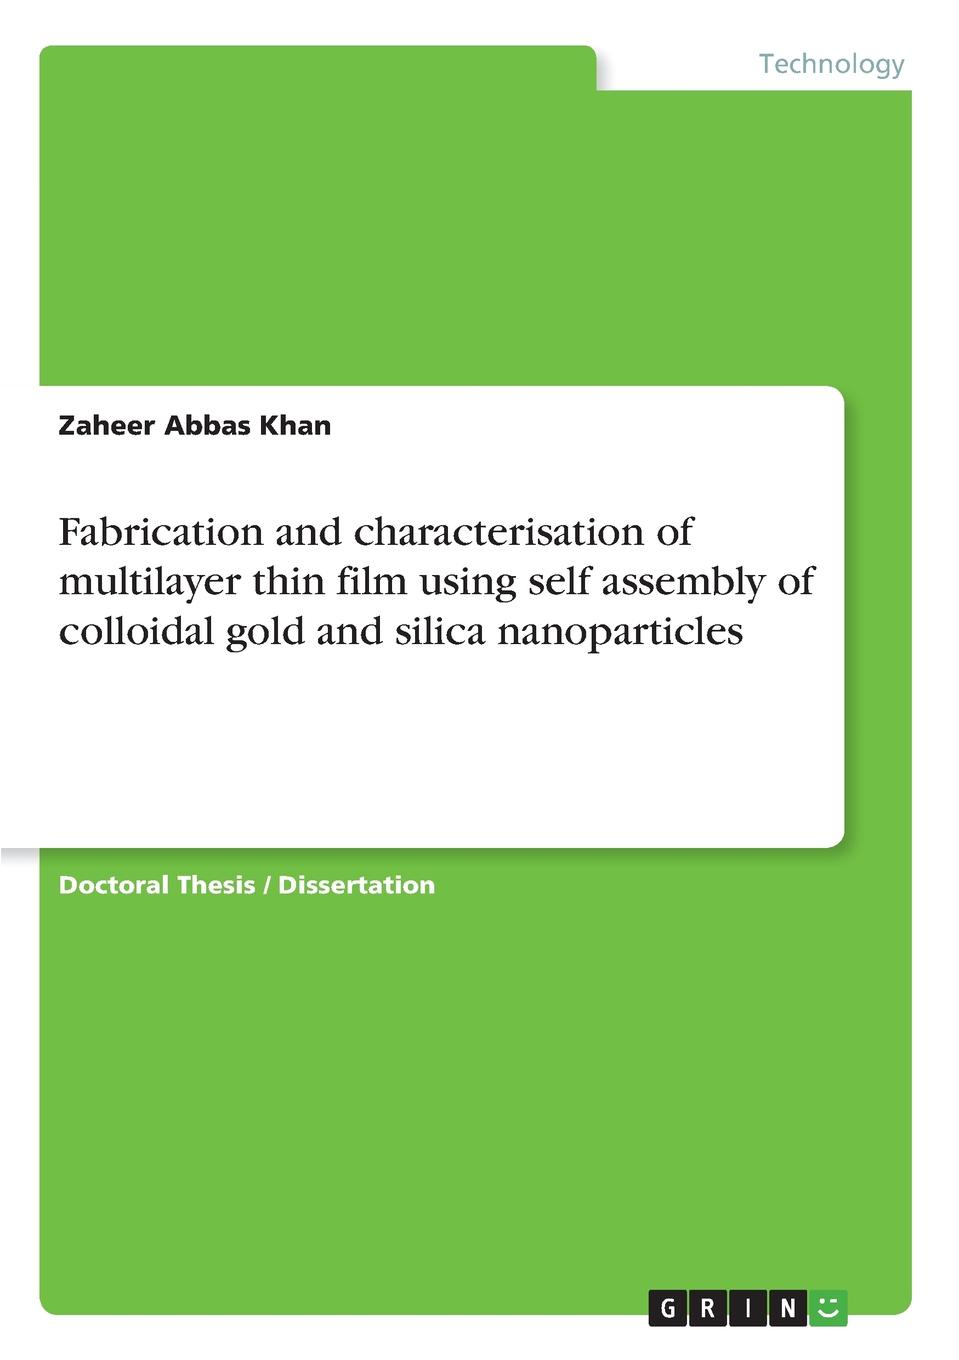 Fabrication and characterisation of multilayer thin film using self assembly of colloidal gold and silica nanoparticles